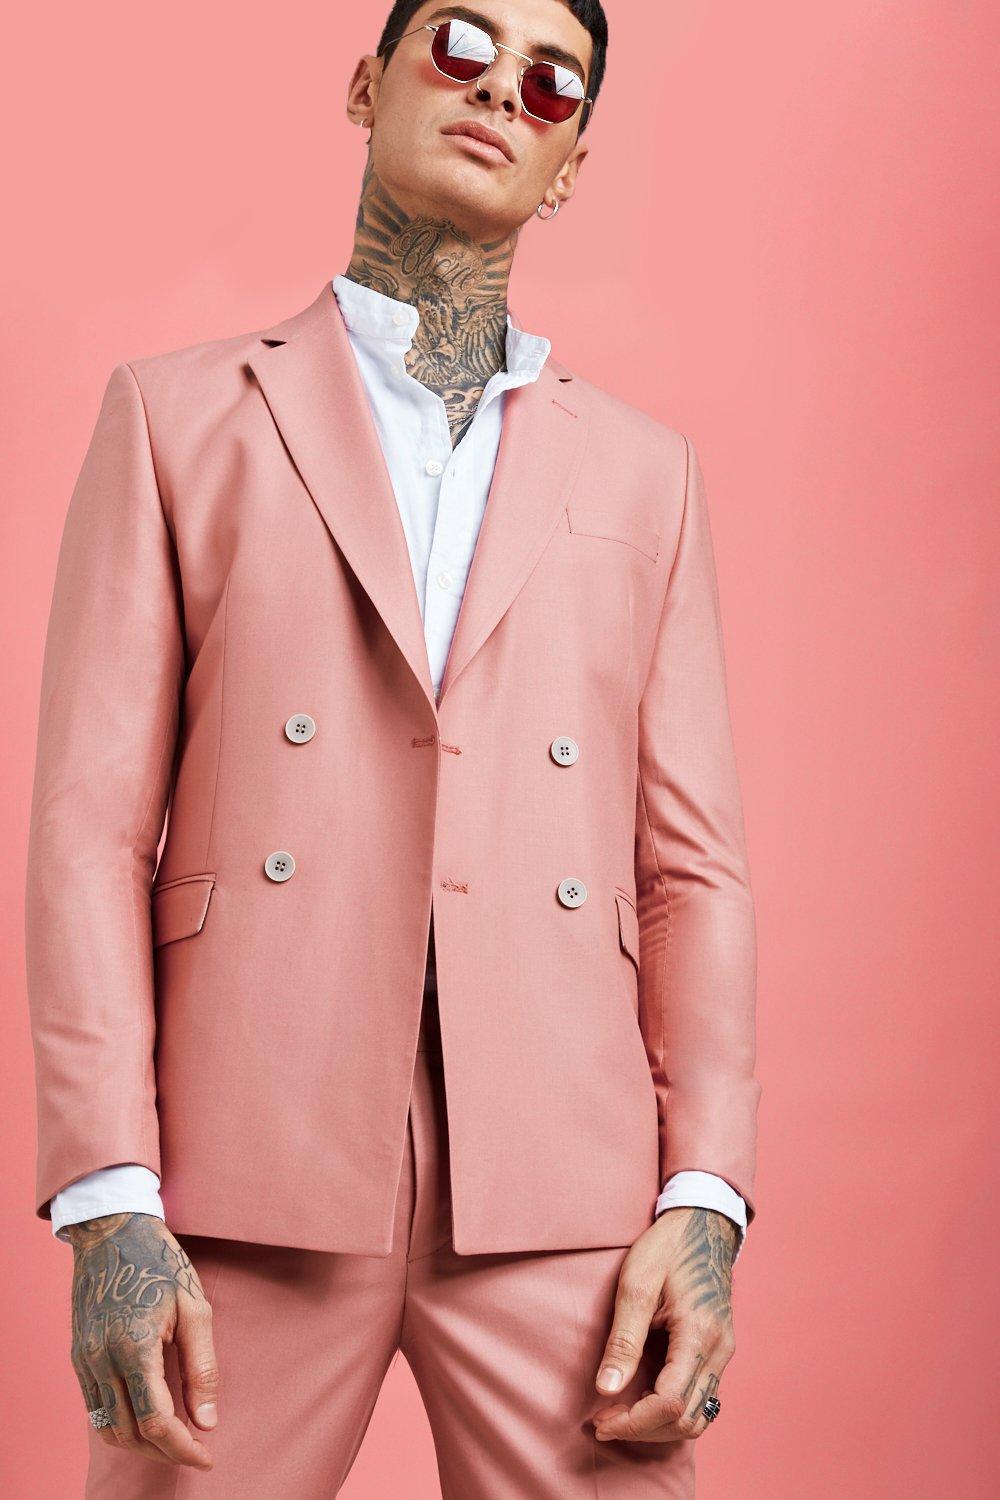 Lyst - BoohooMAN Plain Double Breasted Skinny Fit Suit Jacket in Pink ...